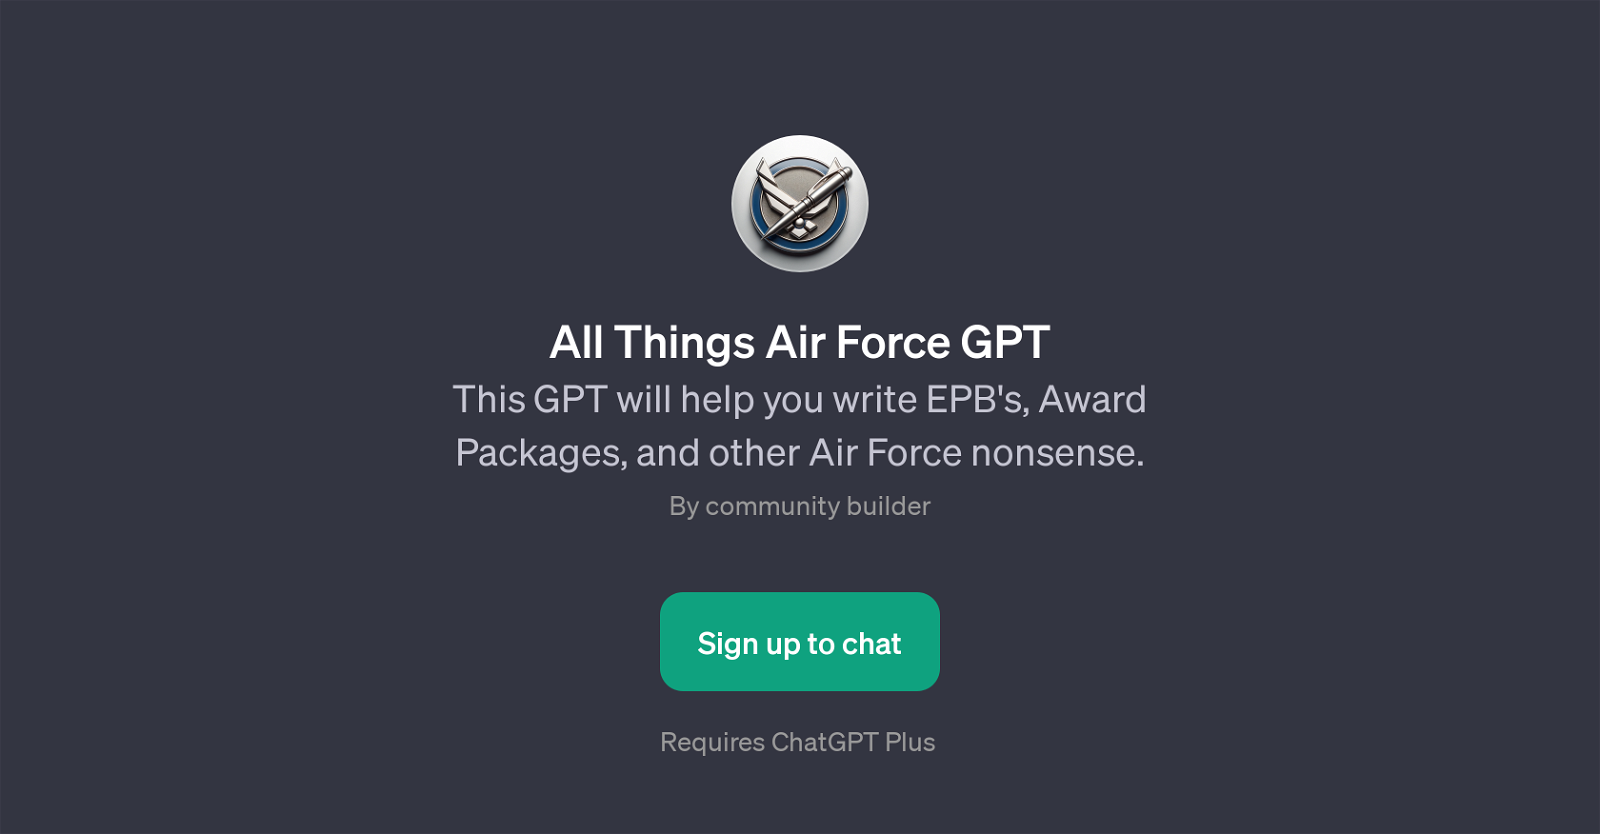 All Things Air Force GPT website